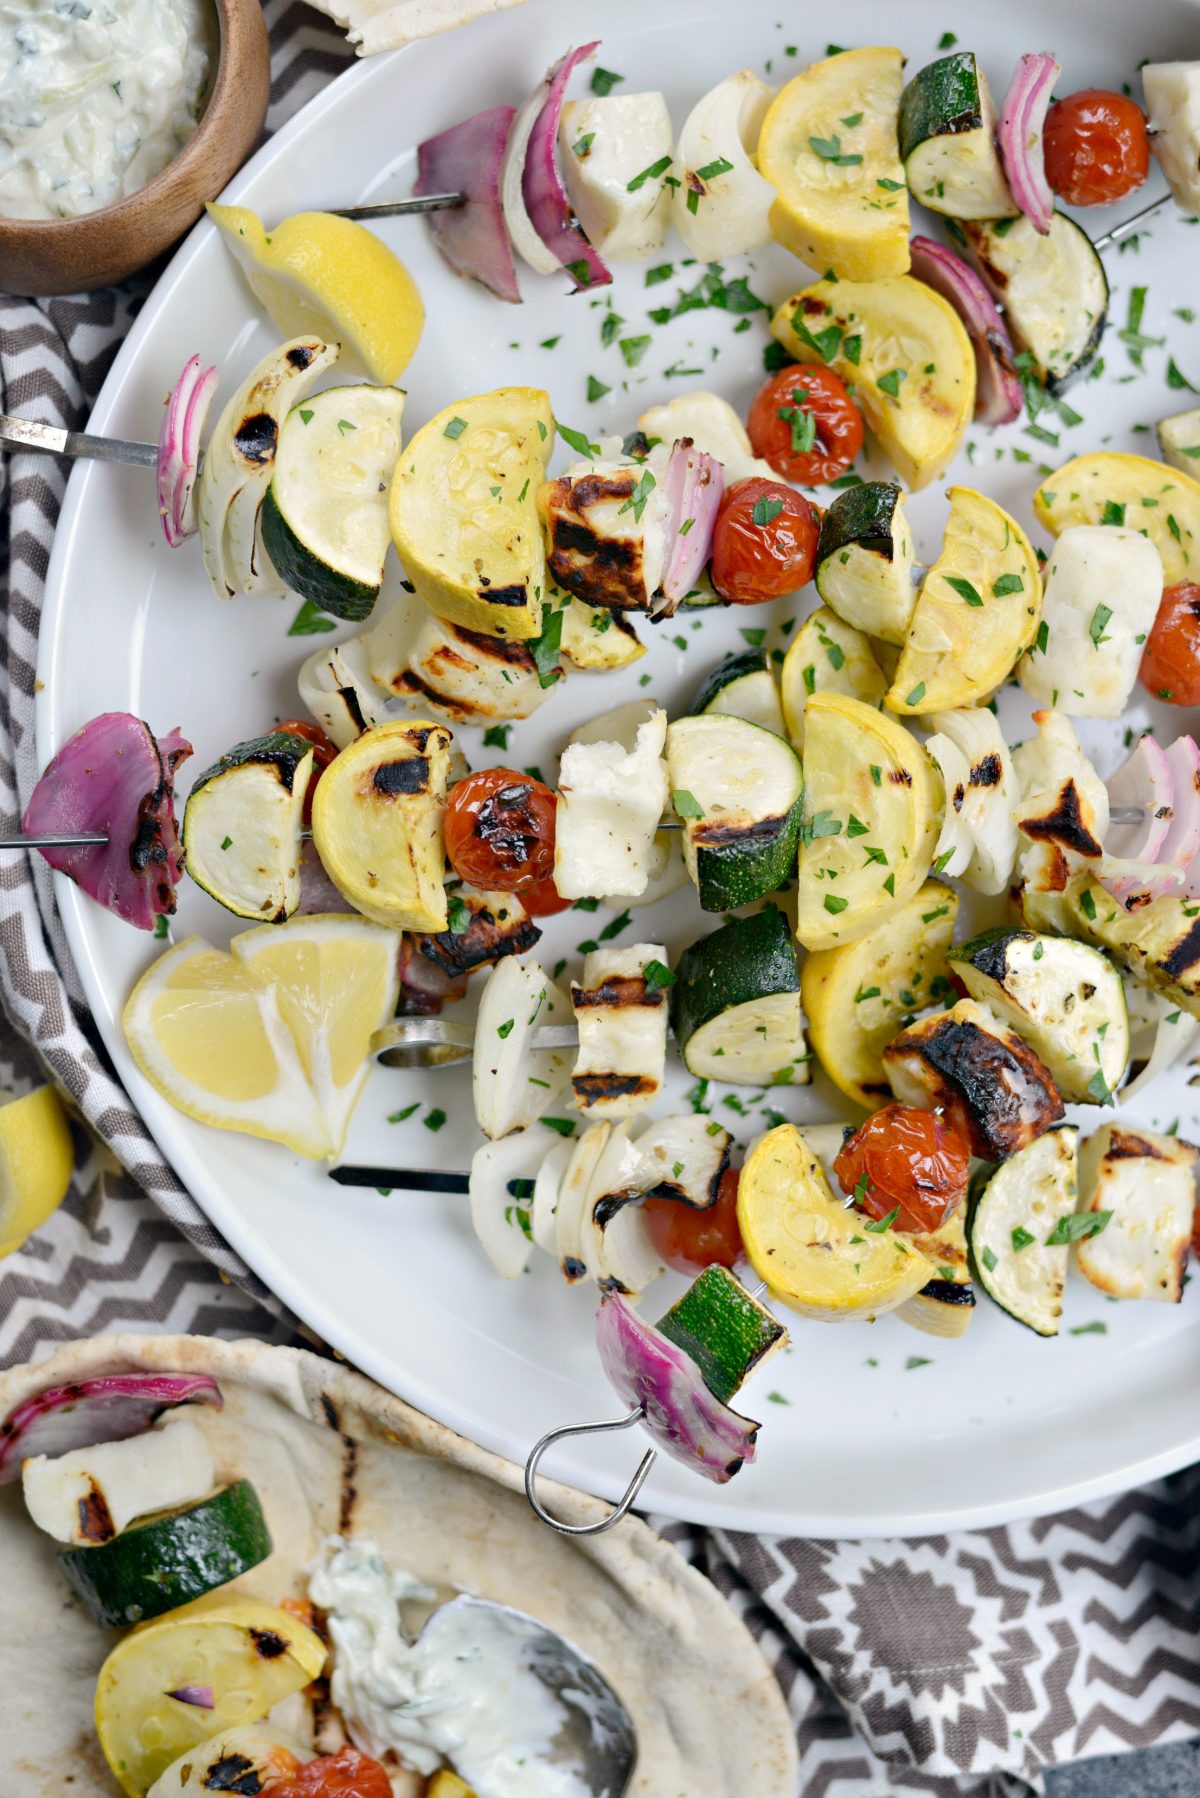 Grilled Halloumi Vegetable Skewers l SimplyScratch.com